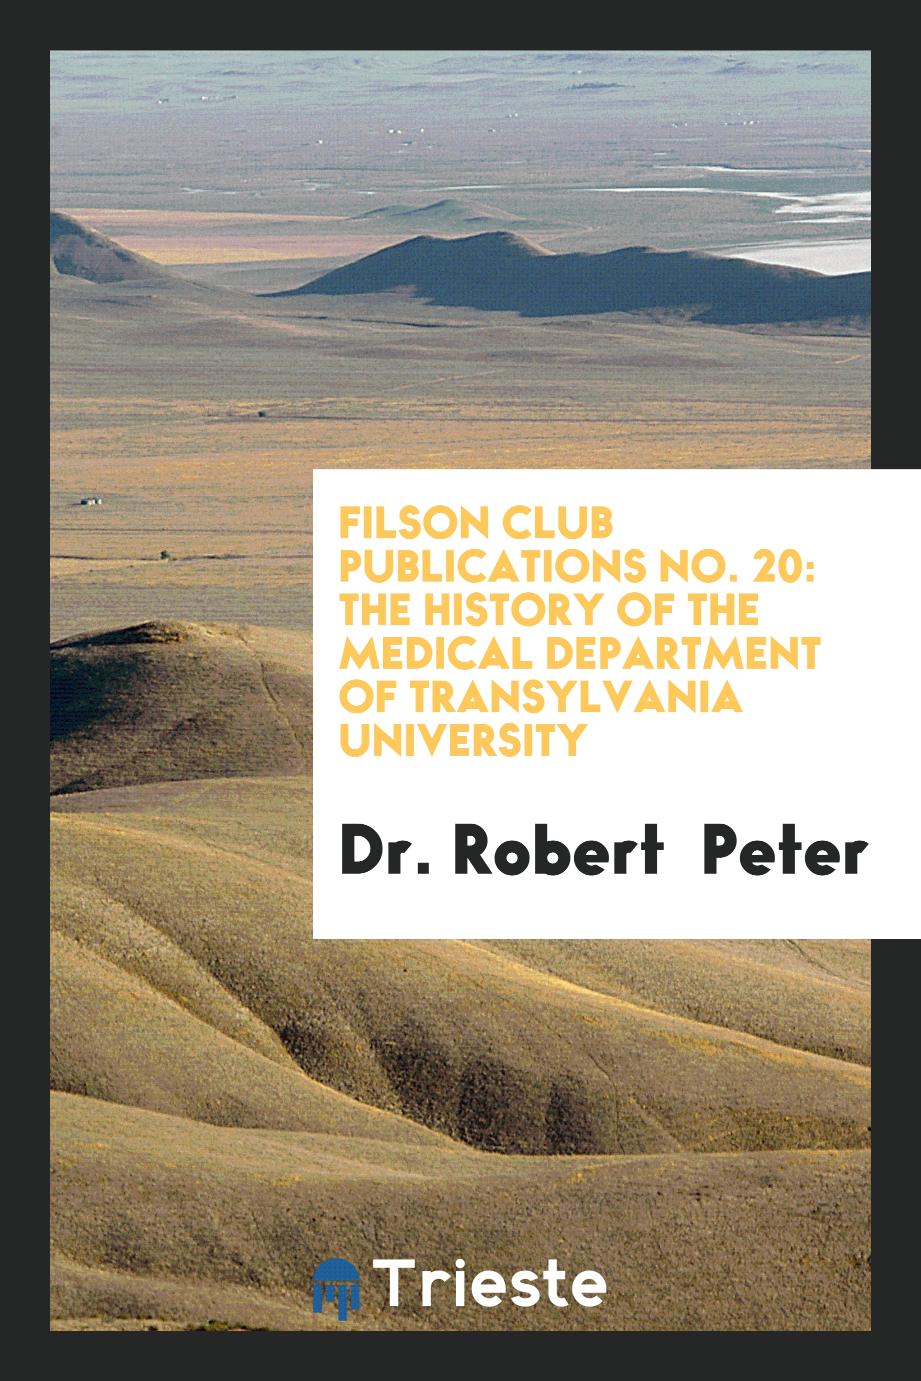 Filson Club Publications No. 20: The History of the Medical Department of Transylvania University